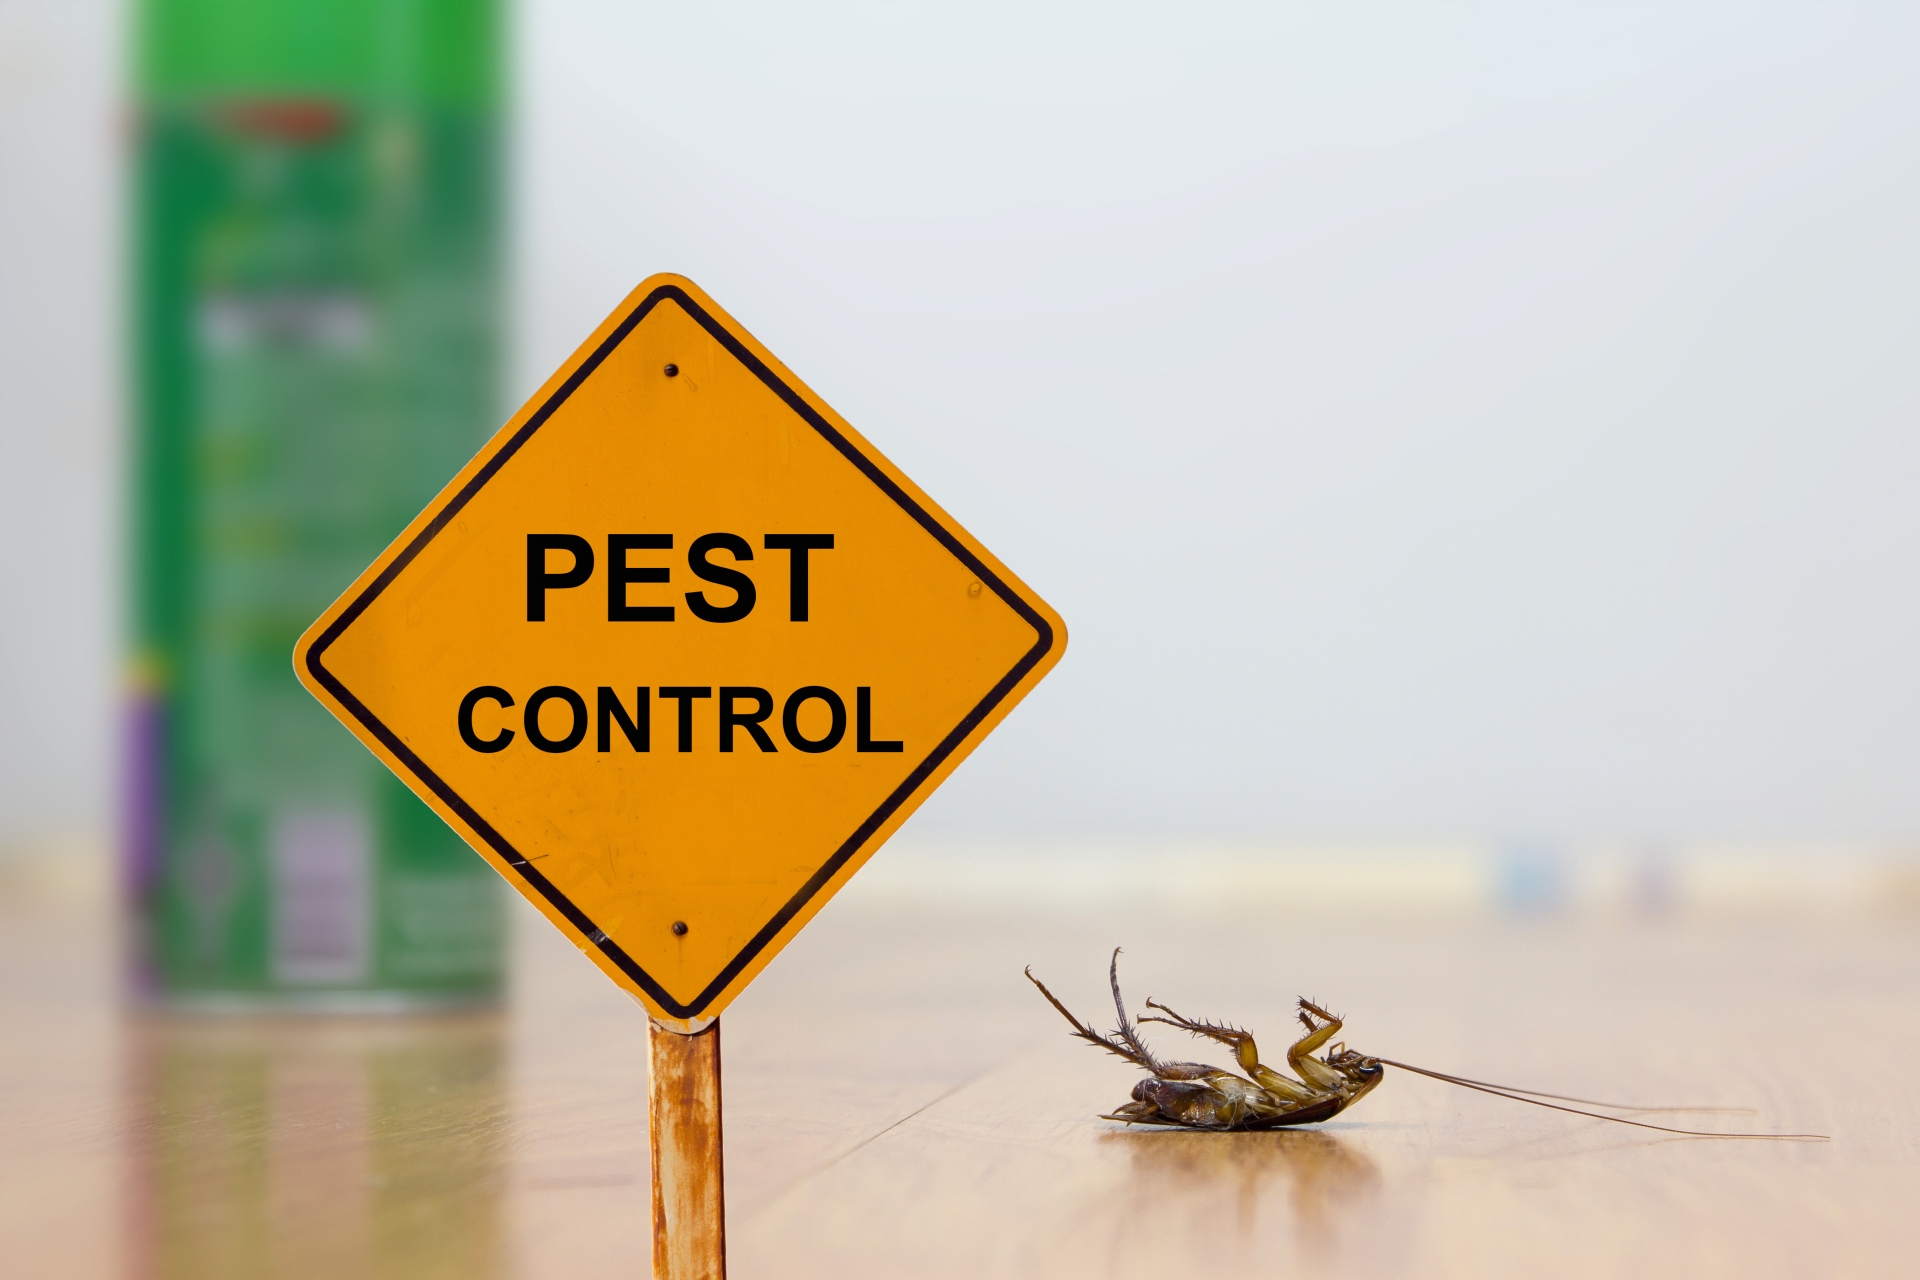 24 Hour Pest Control, Pest Control in Rickmansworth, Chorleywood, Croxley Green, WD3. Call Now 020 8166 9746